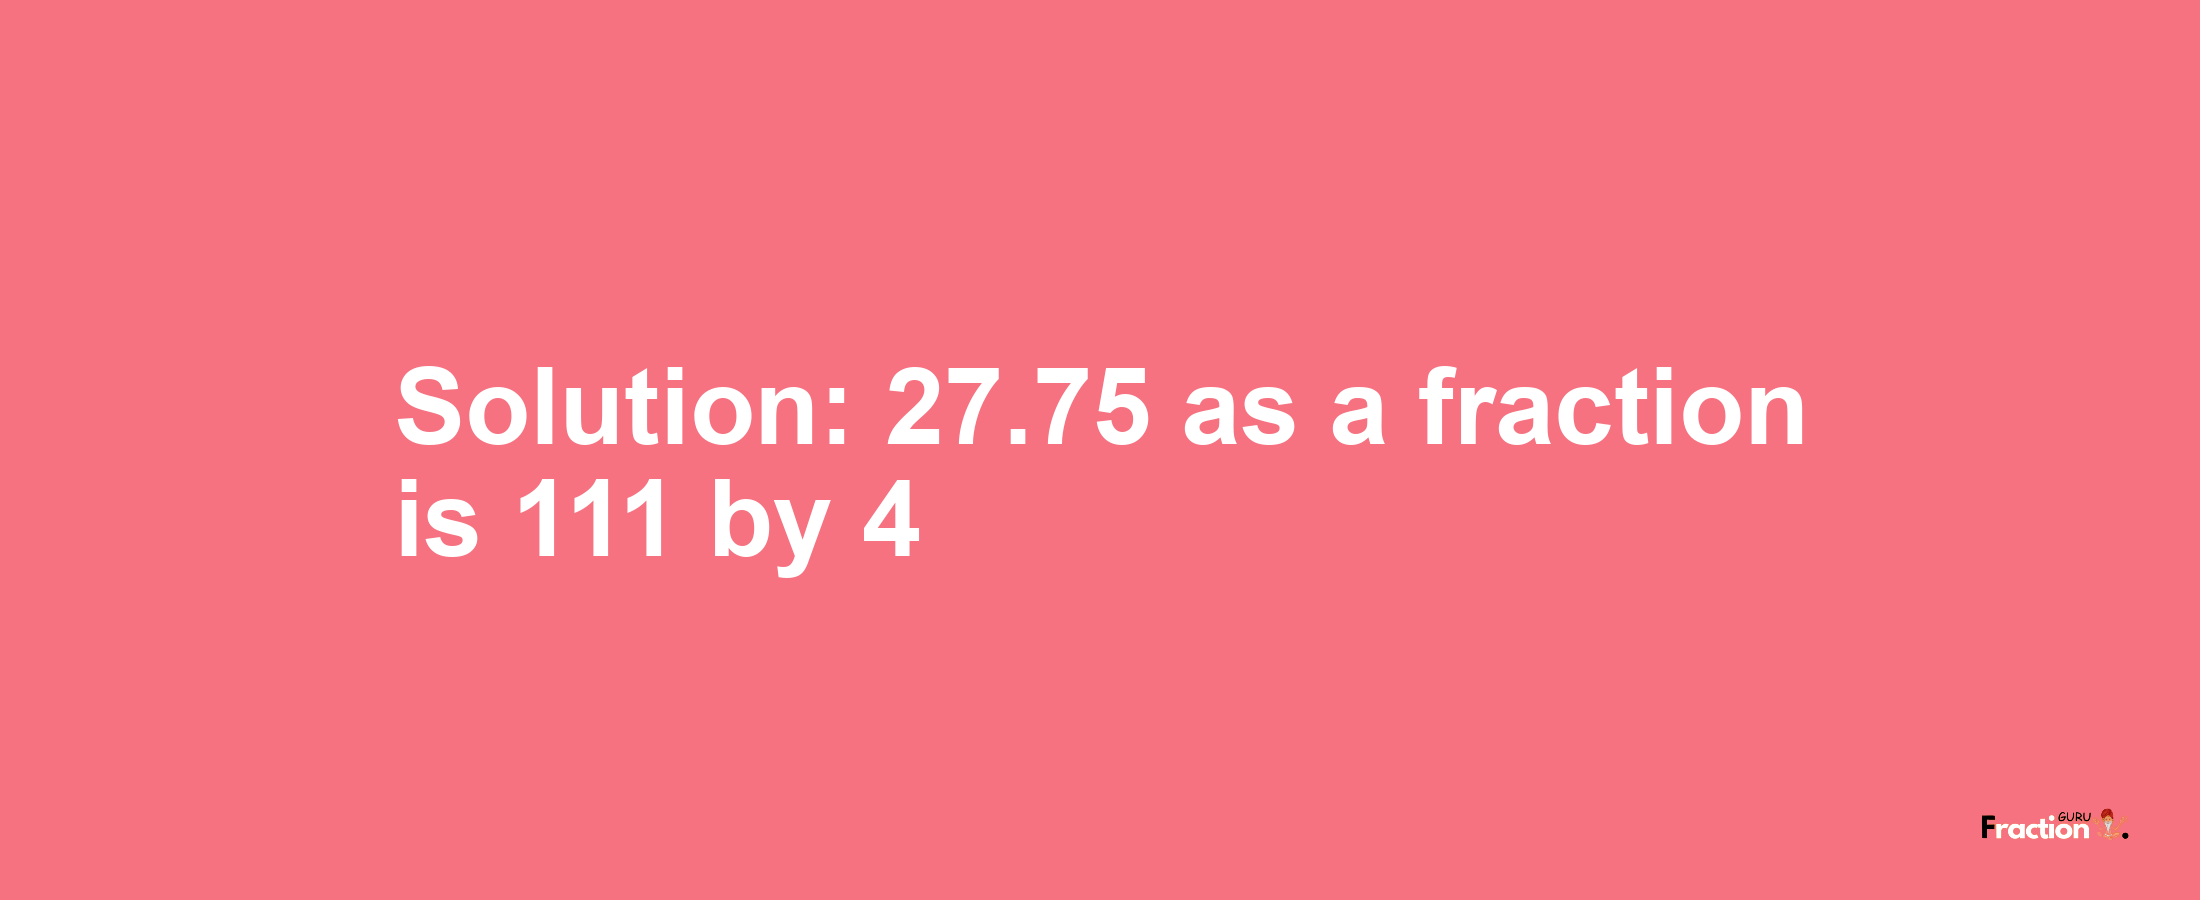 Solution:27.75 as a fraction is 111/4